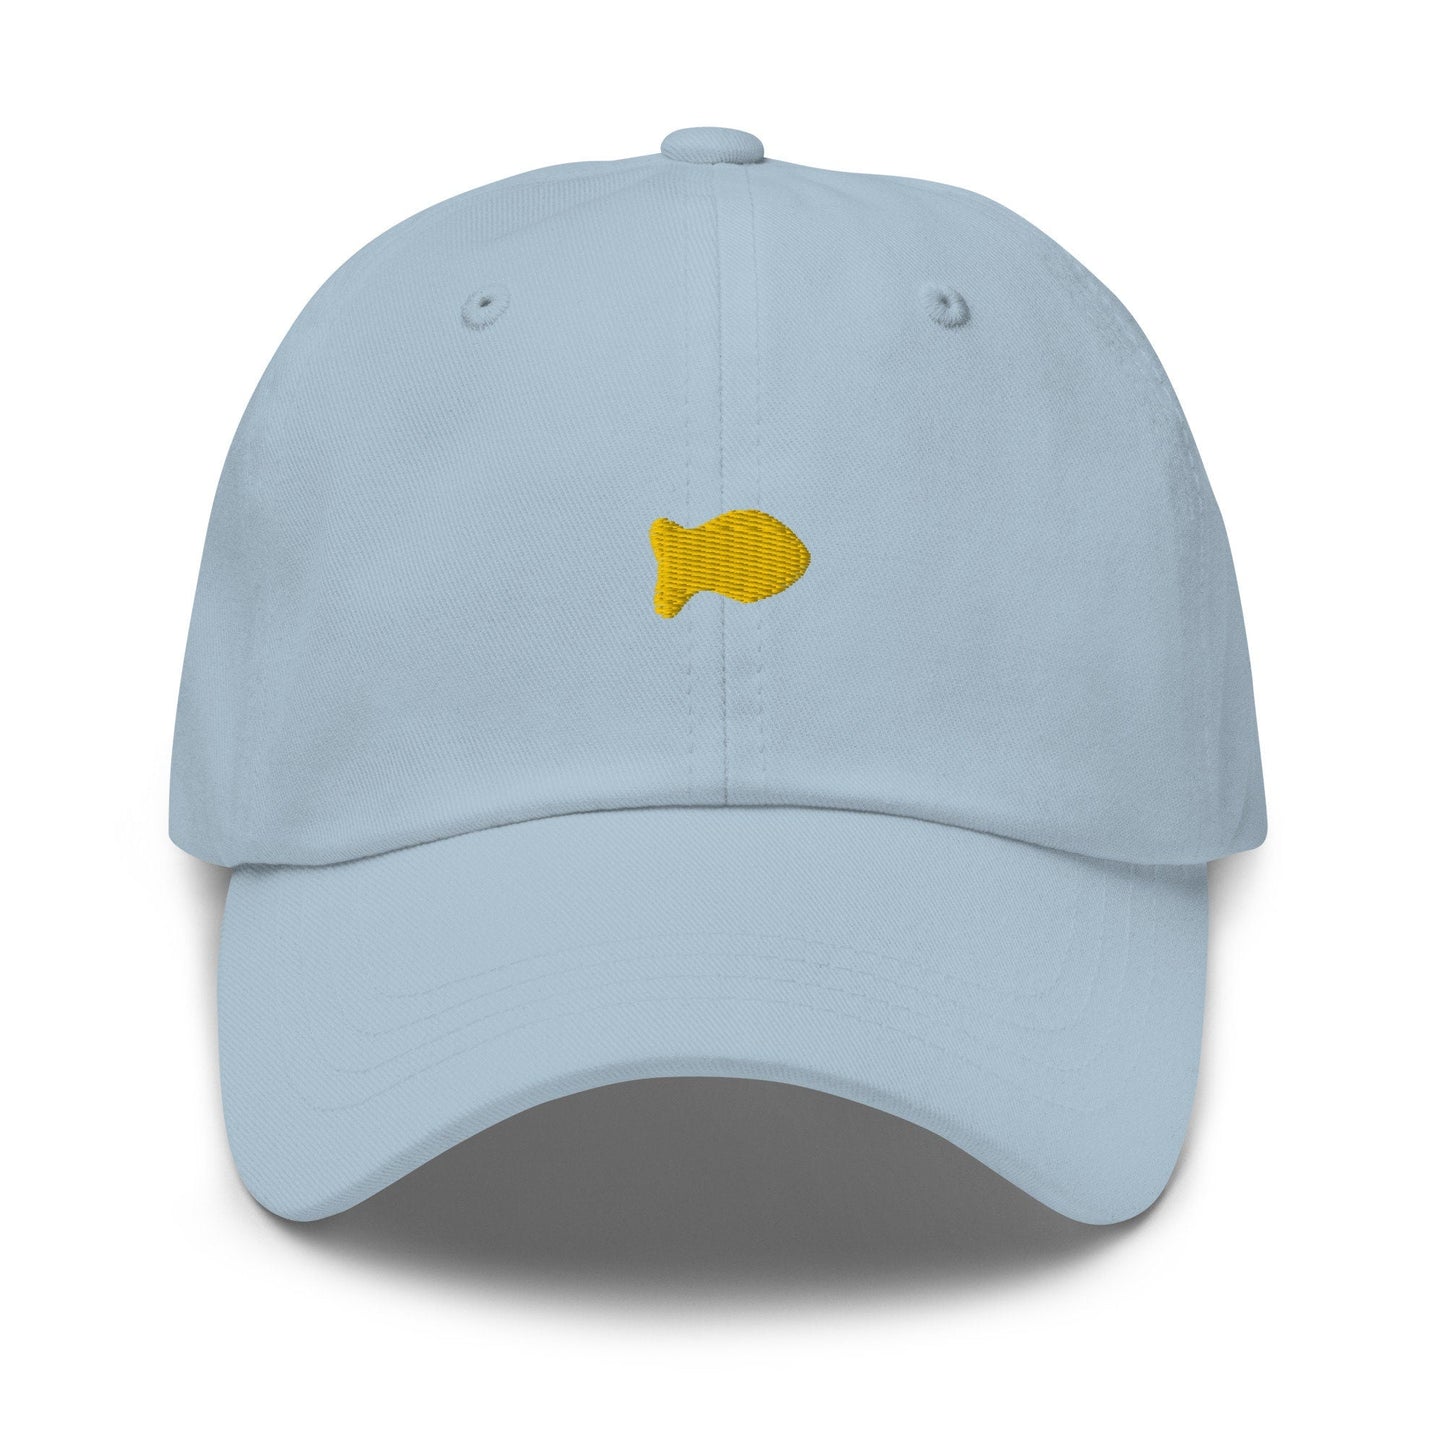 Goldfish Dad Hat - Gift for Cheesy Snack Fans - Minimalist Cotton Embroidered Cap - Evilwater Originals